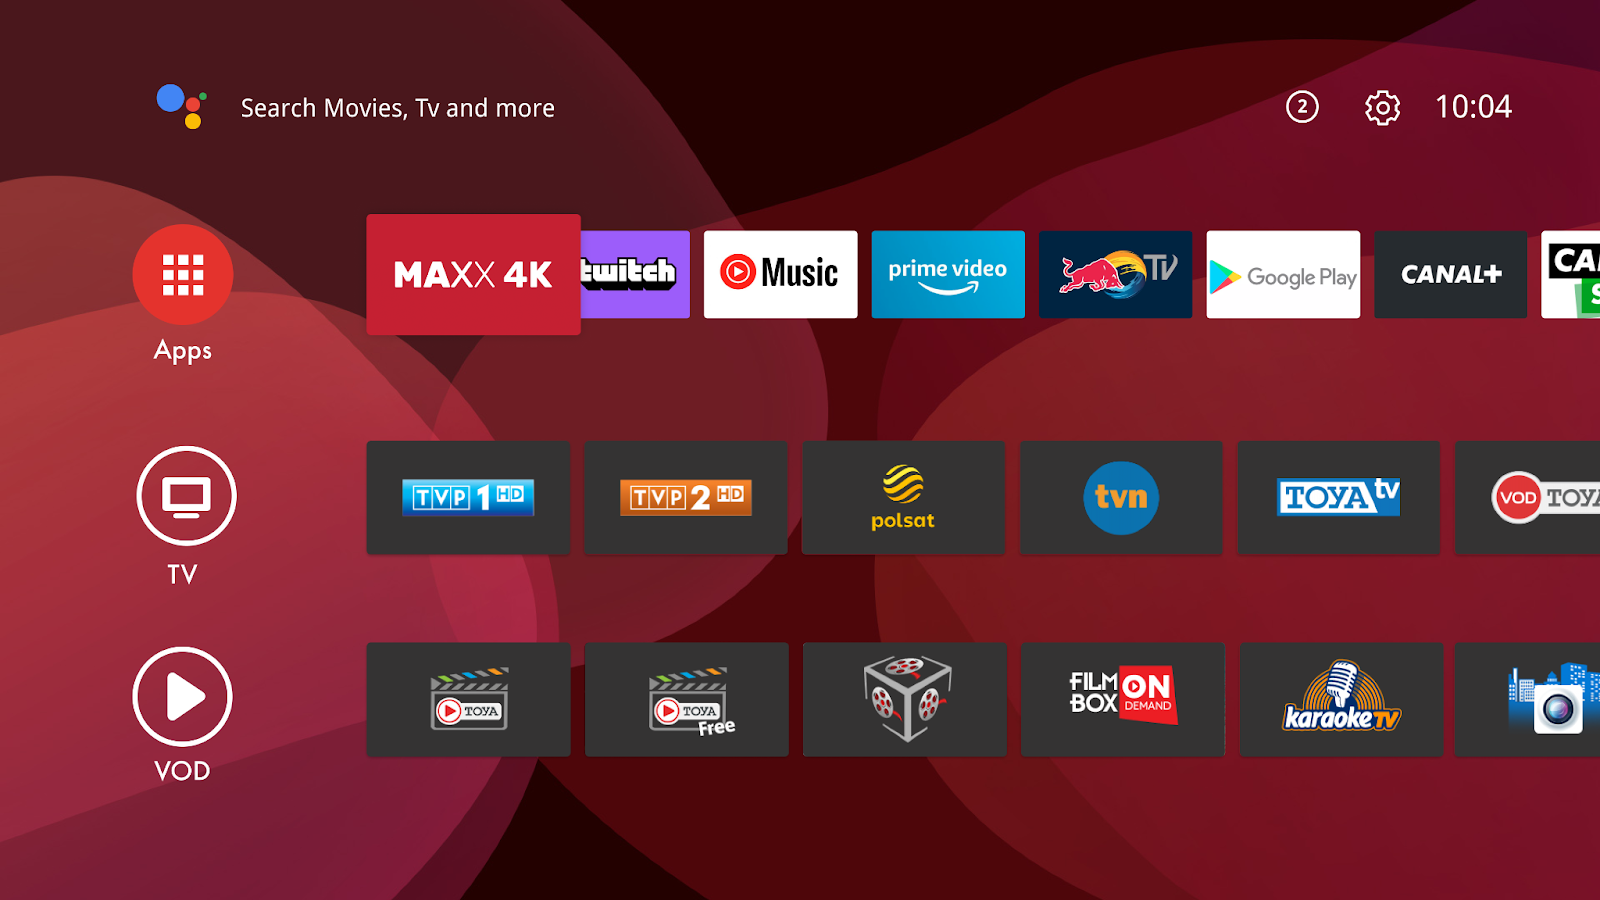 TOYA Android TV Application Launcher